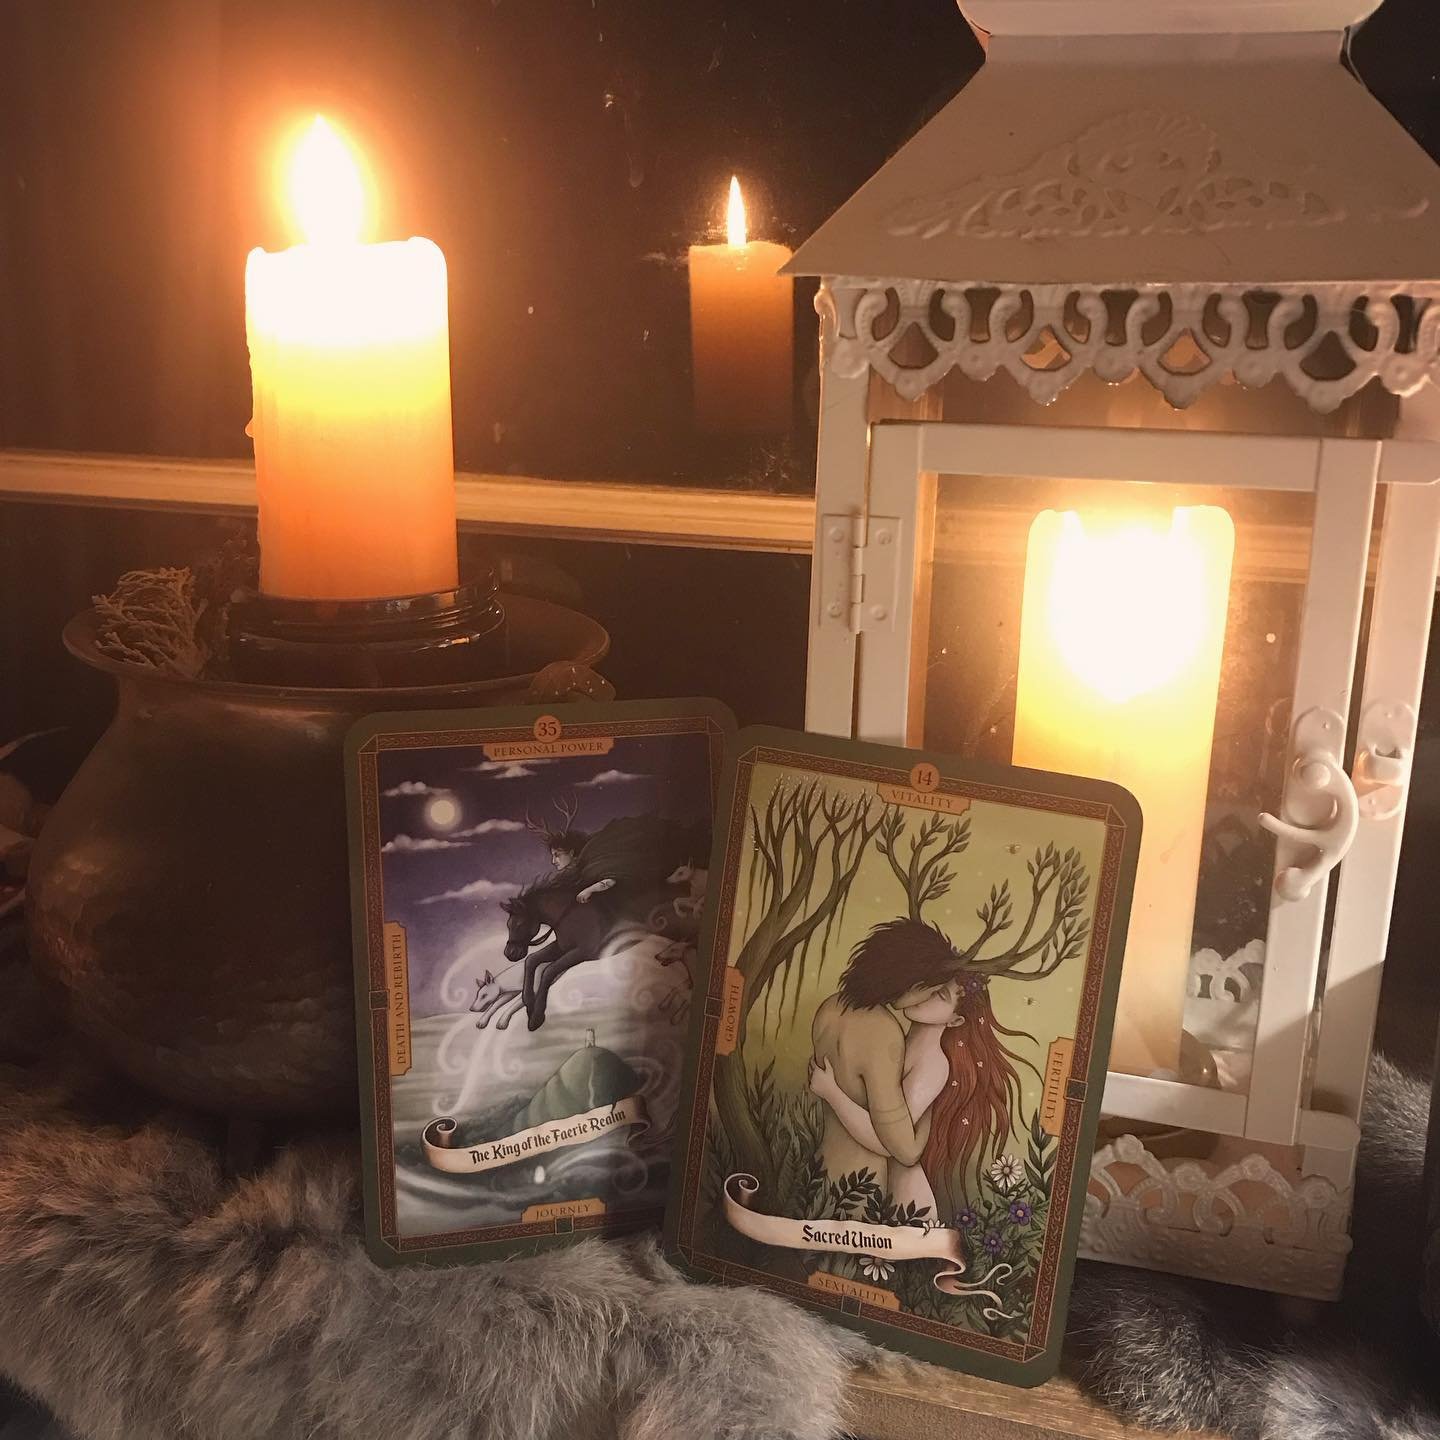 Samhain blessings to you folk in the south&hellip; place a candle in your window to light the way home 🔥
I do believe I might spend the rest of the night making and blessing spirit guardians 🖤
And to you lovely folk in the north enjoy a bountiful B